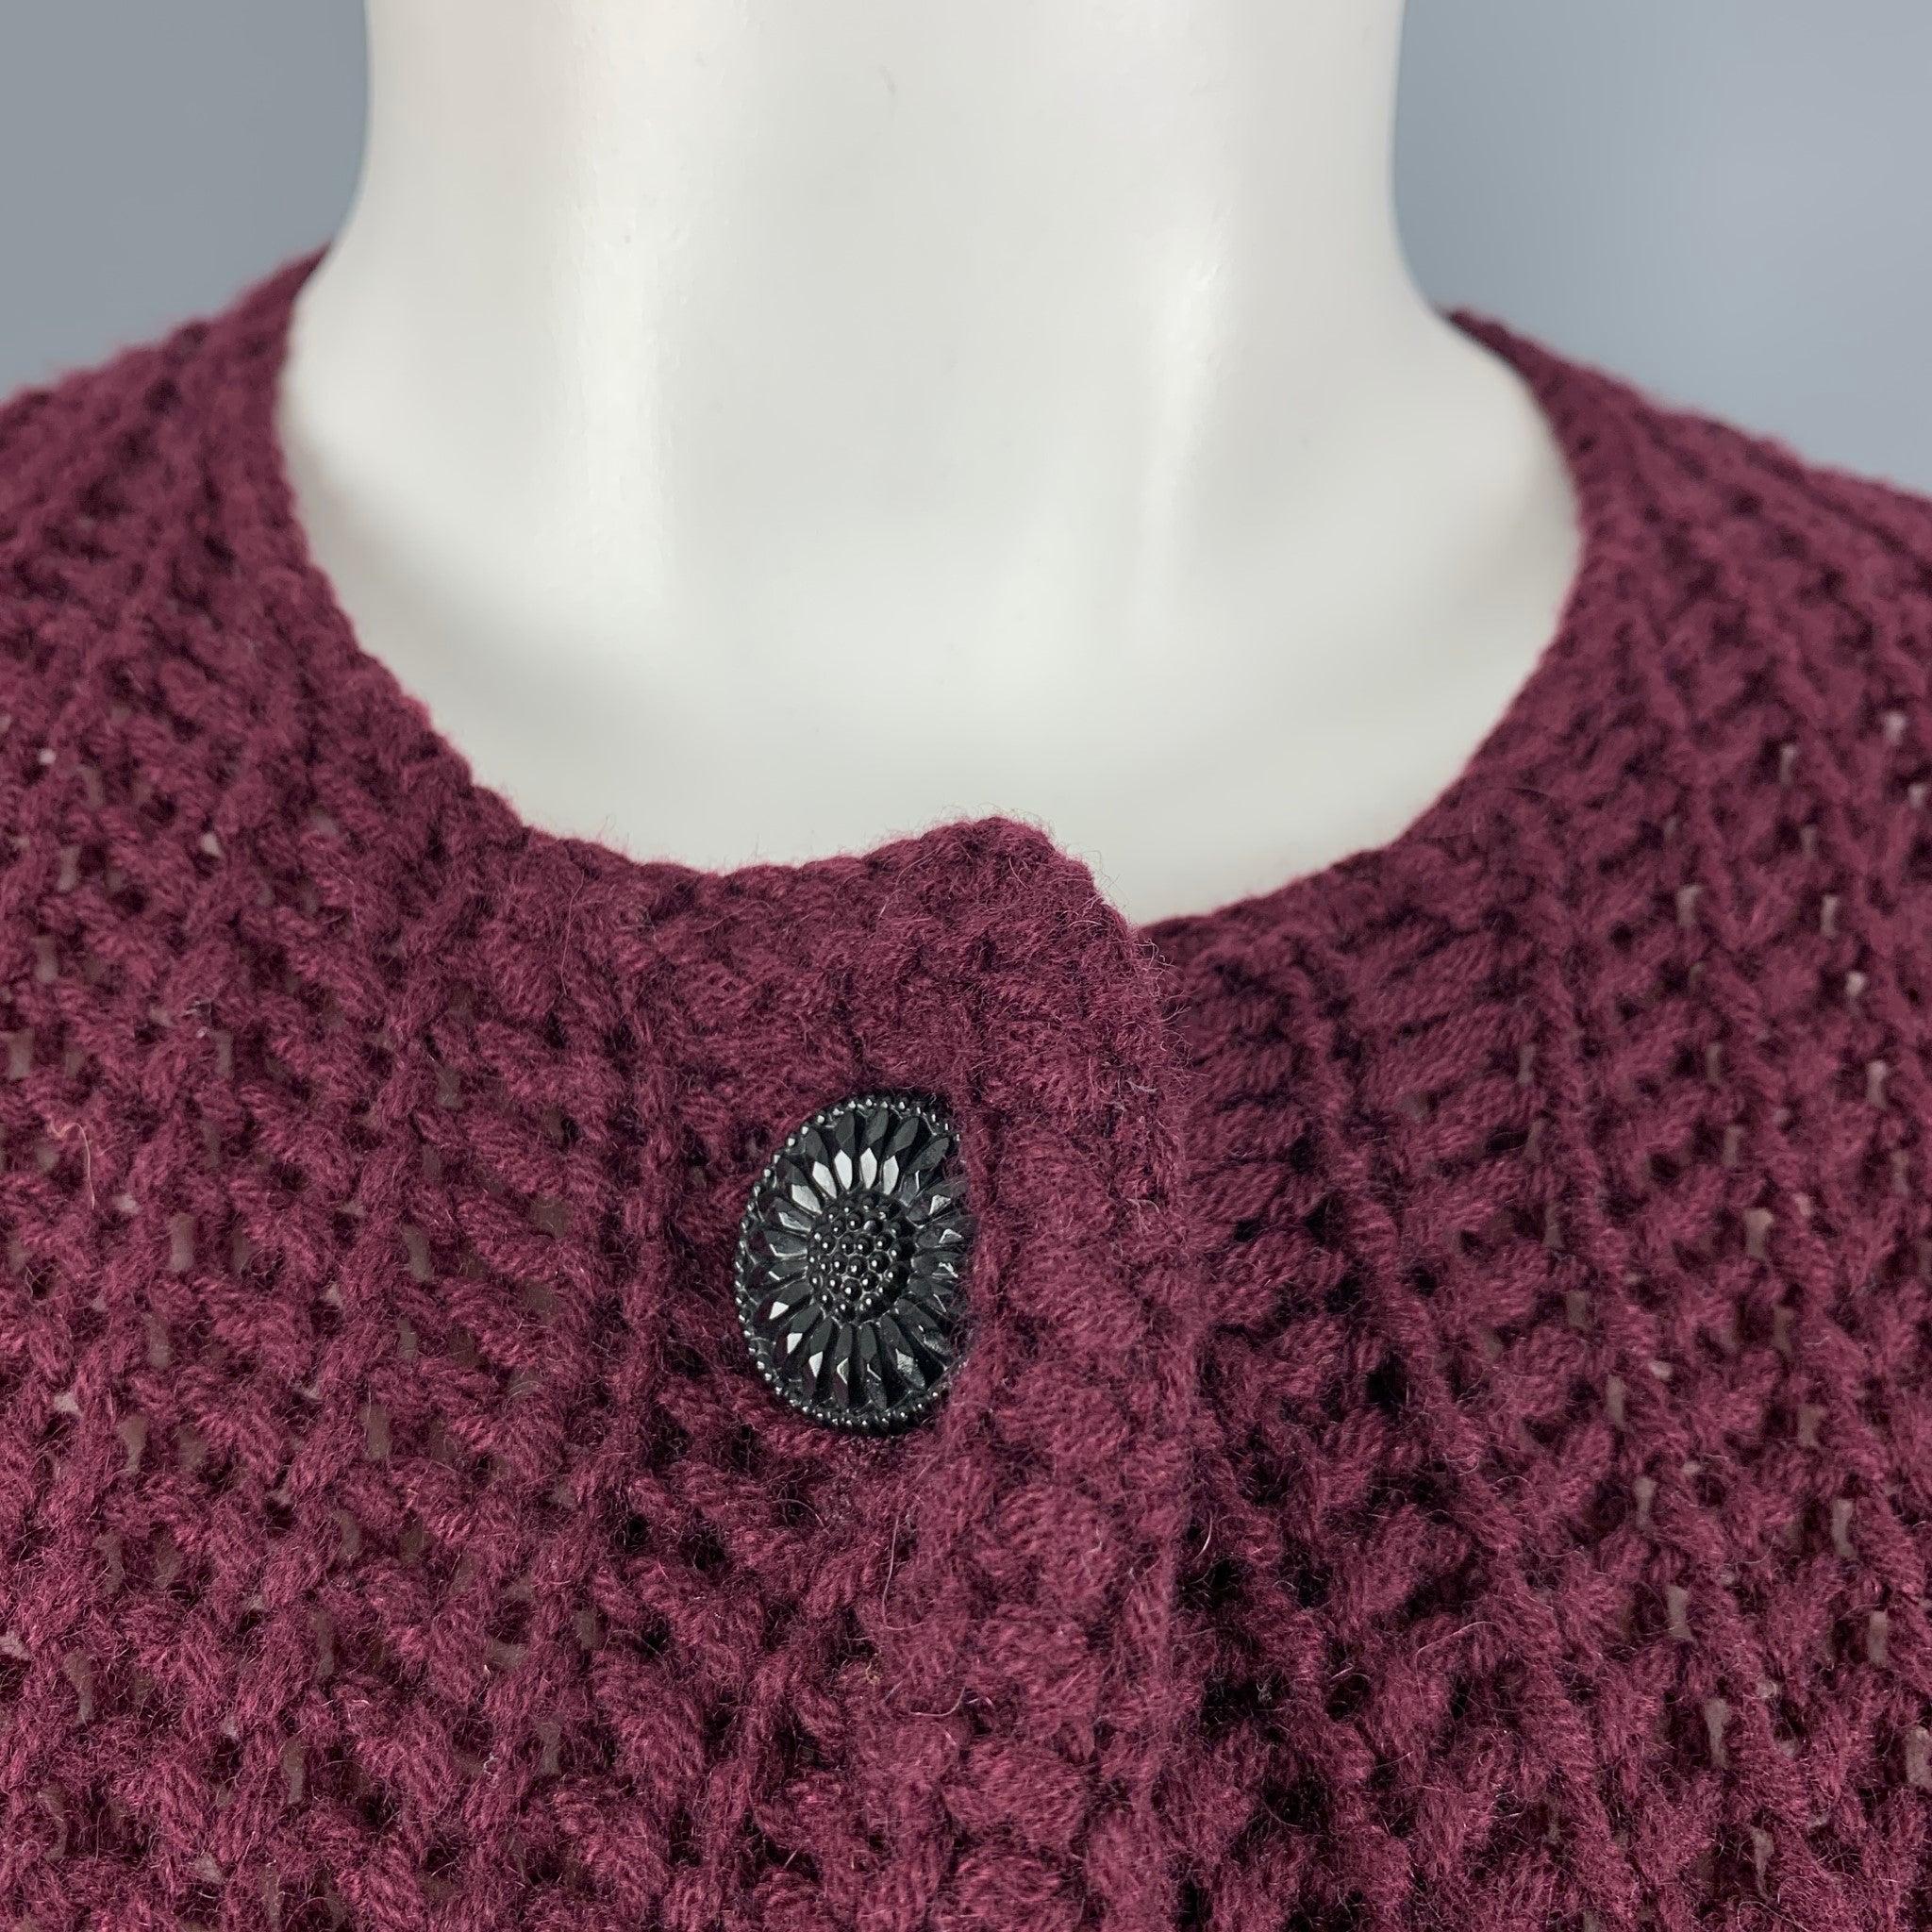 RALPH LAUREN COLLECTION by cardigan sweater comes in a burgundy knitted cashmere featuring a buttoned closure. Made in Italy.Excellent Pre-Owned Condition. 

Marked:   M 

Measurements: 
 
Shoulder: 15.5 inches Chest: 35 inches Sleeve: 27 inches